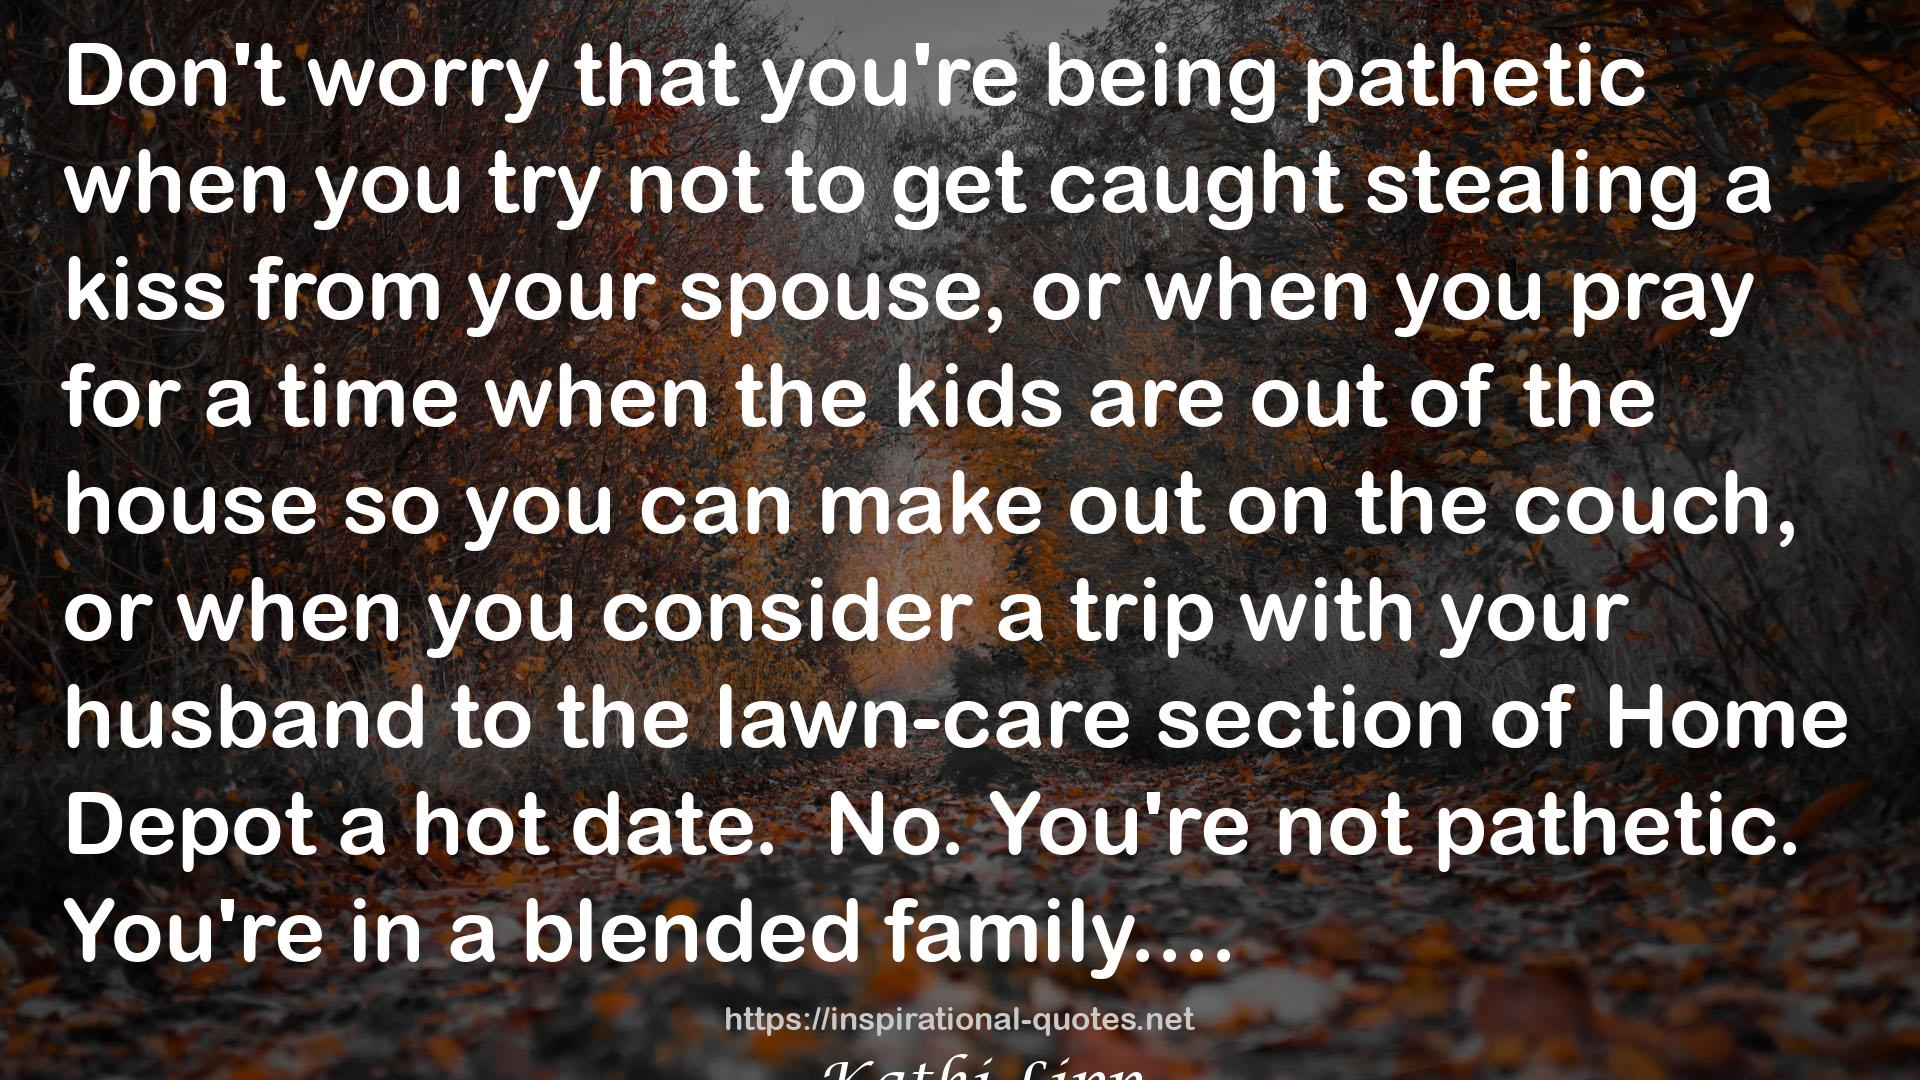 But I'm Not a Wicked Stepmother!: Secrets of Successful Blended Families QUOTES